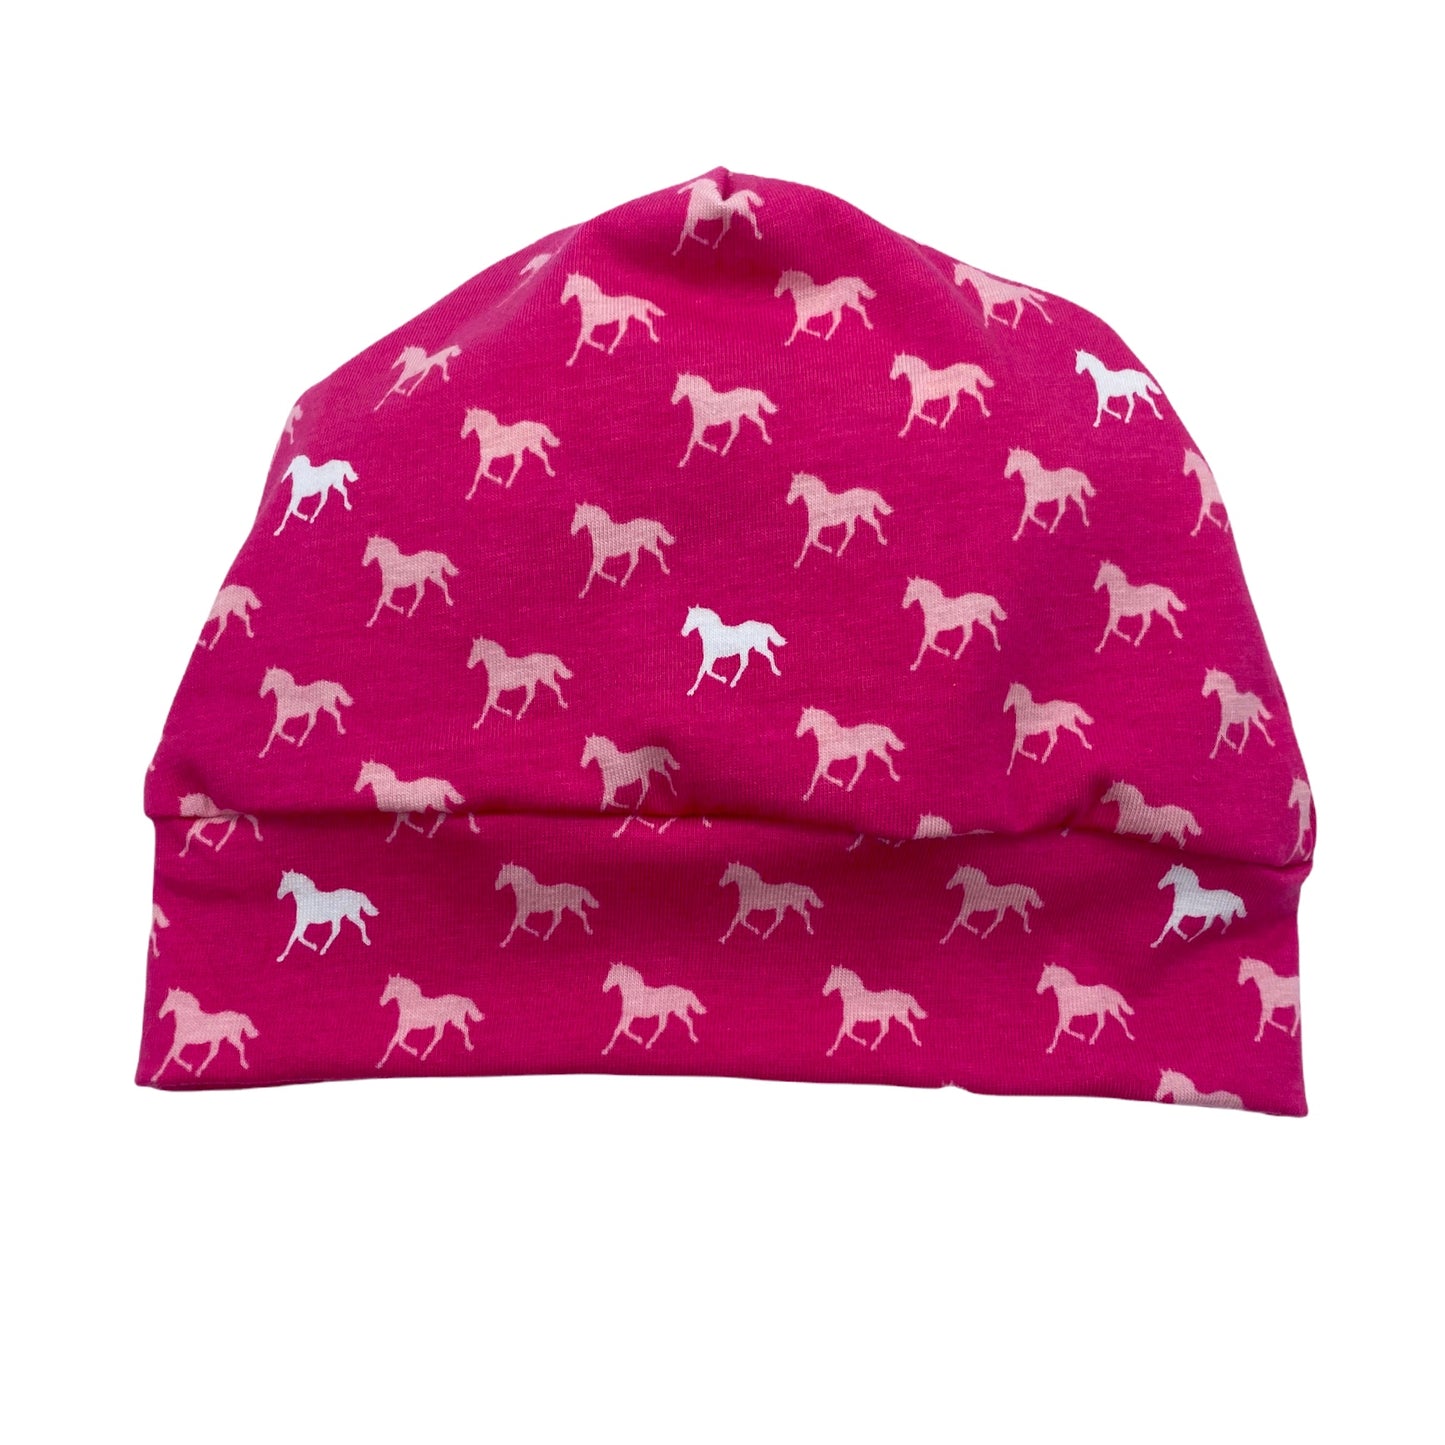 Beanie Hat in Little Kid: Horses on Pink